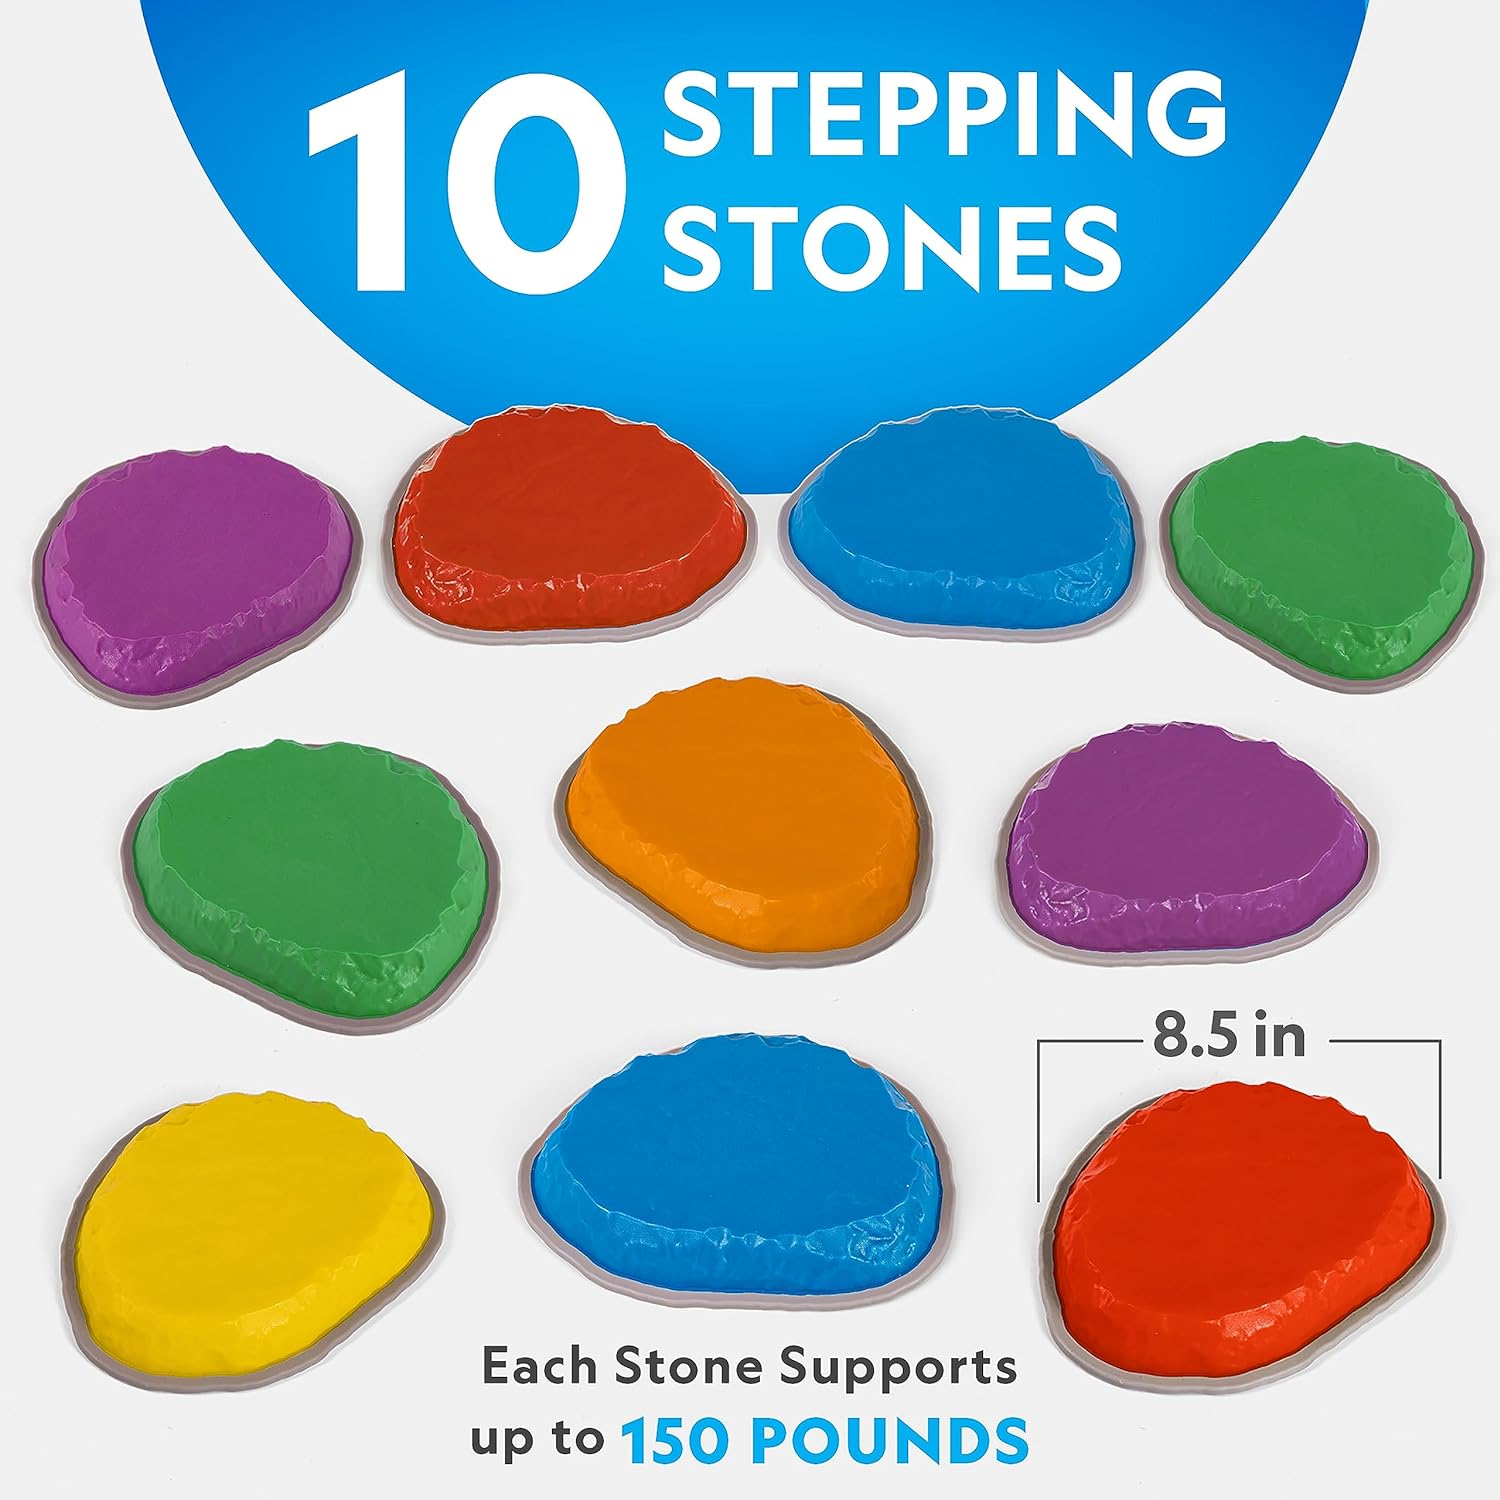 NATIONAL GEOGRAPHIC Stepping Stones for Kids – 10 Durable Non-Slip Stones Encourage Toddler Balance  Gross Motor Skills, Indoor  Outdoor Toys, Balance Stones, Obstacle Course (Amazon Exclusive)